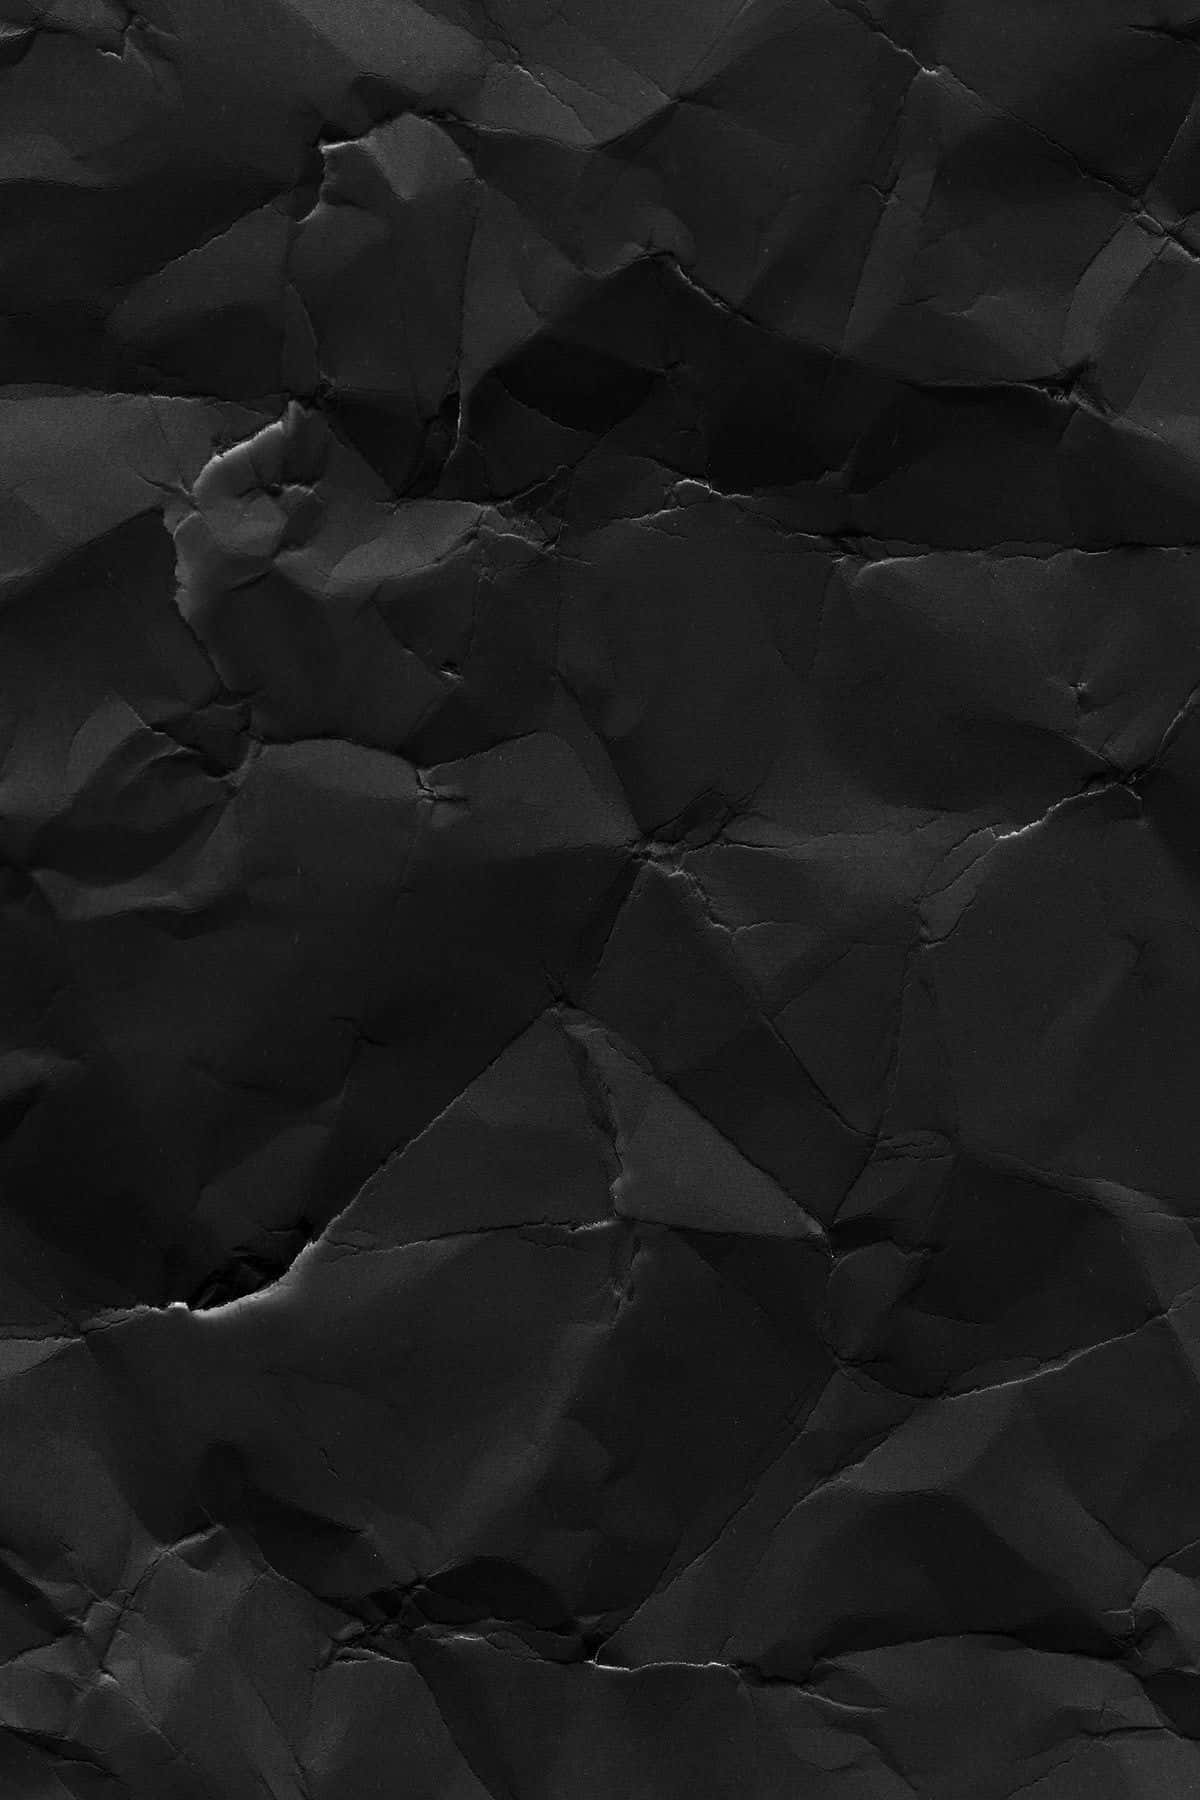 Black Paper Texture With Crumpled Edges